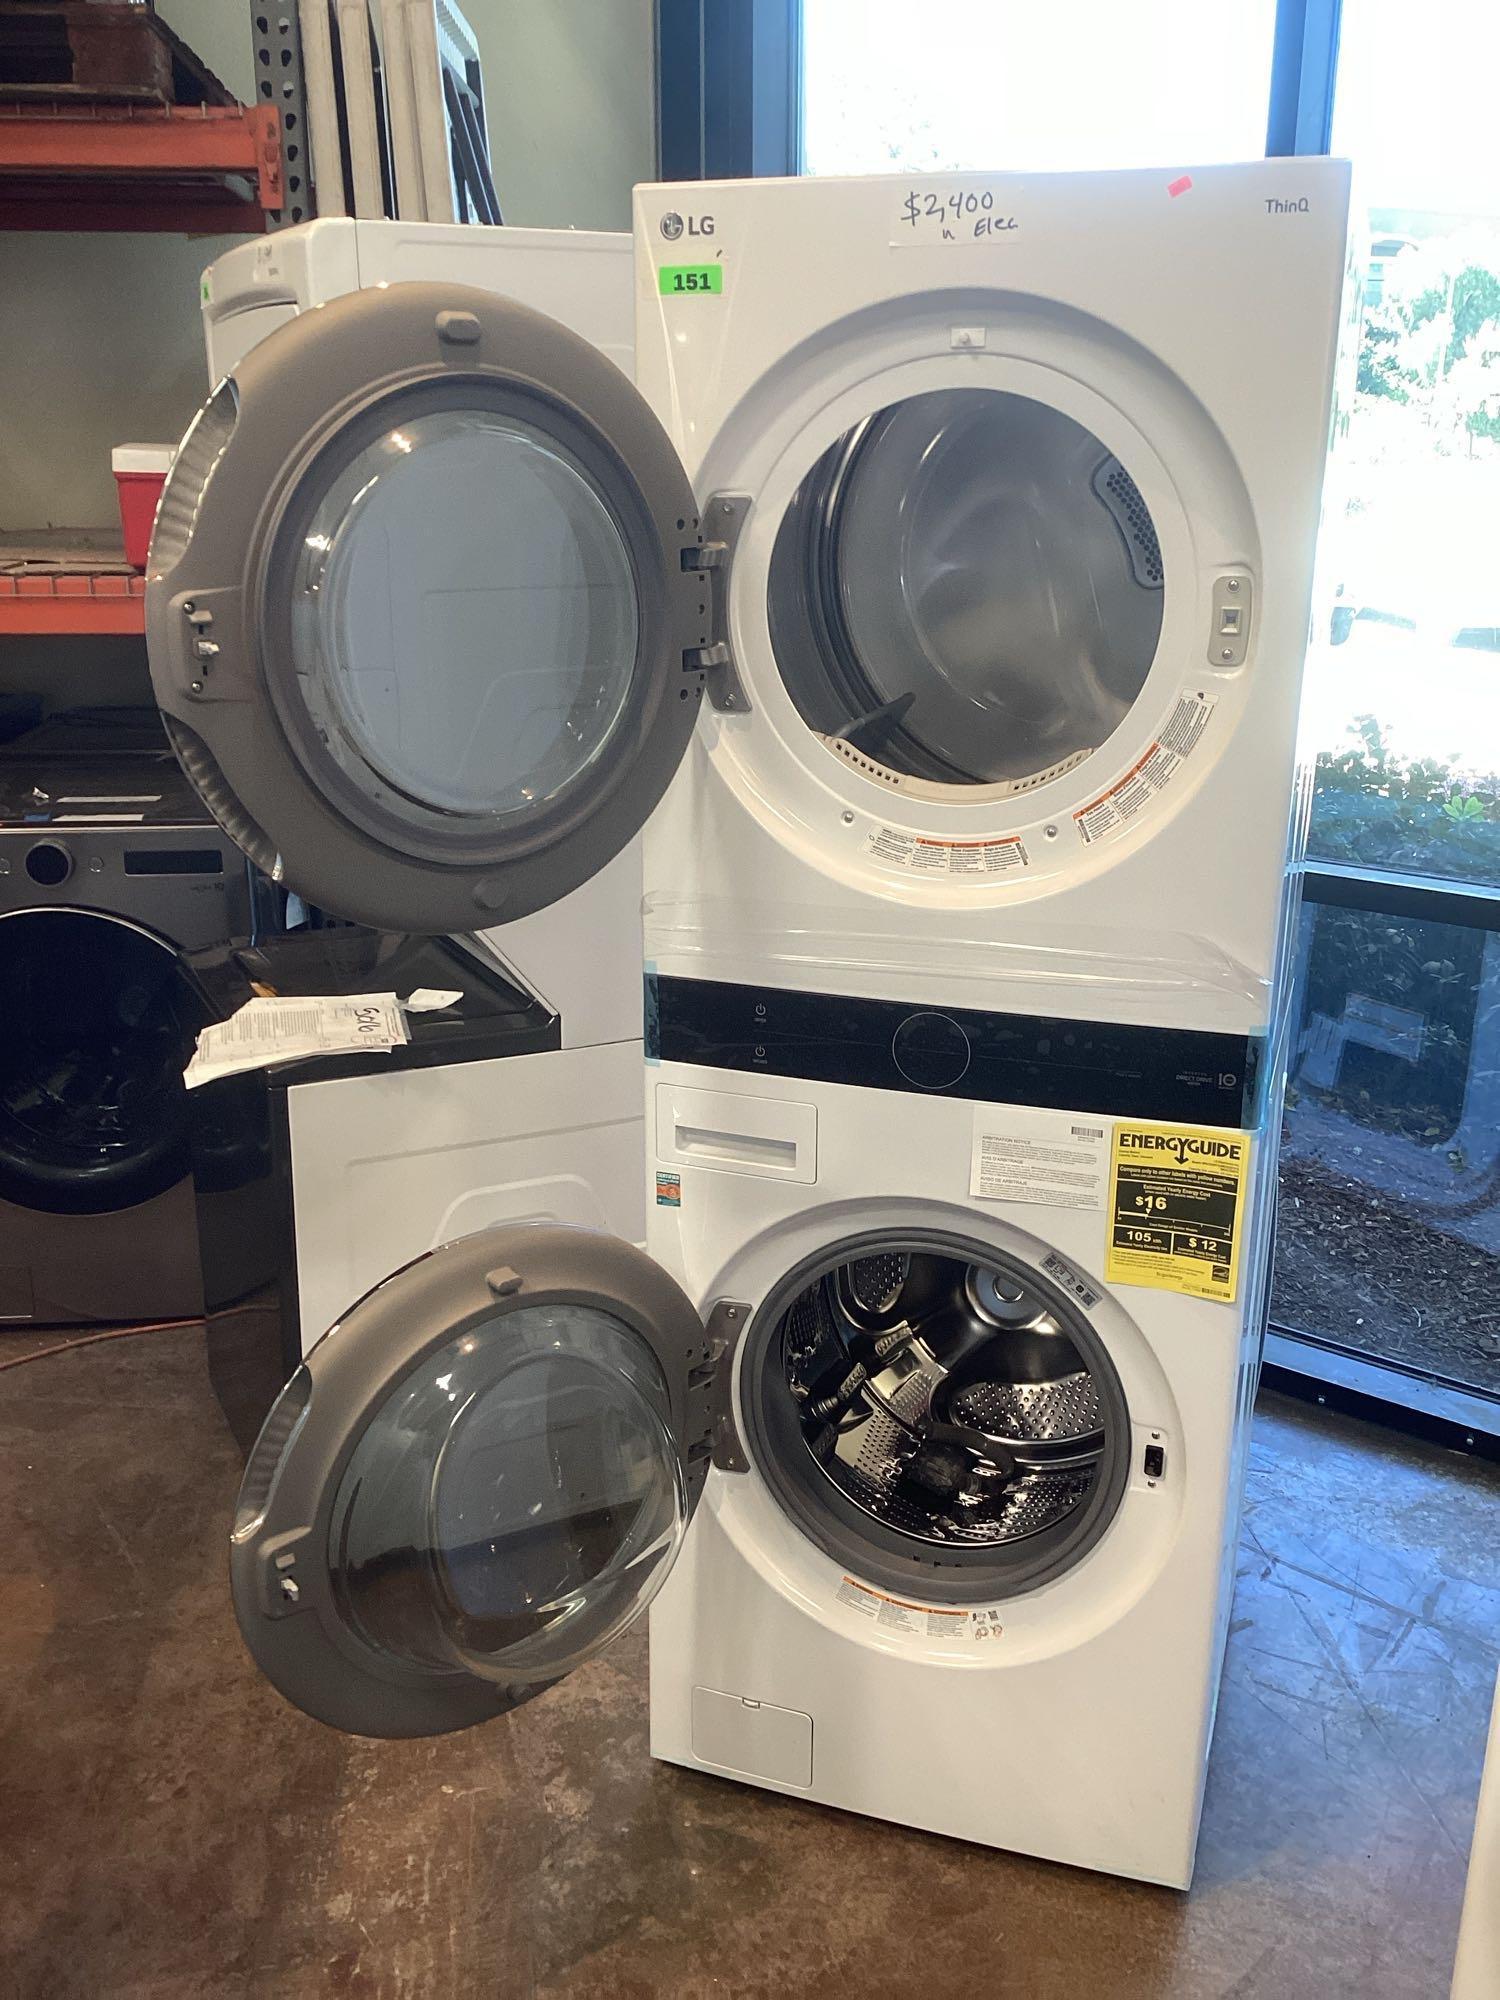 LG 4.5 cu. ft. Smart Front Load Washer and 7.4 cu. ft. Electric Dryer WashTower*UNUSED*